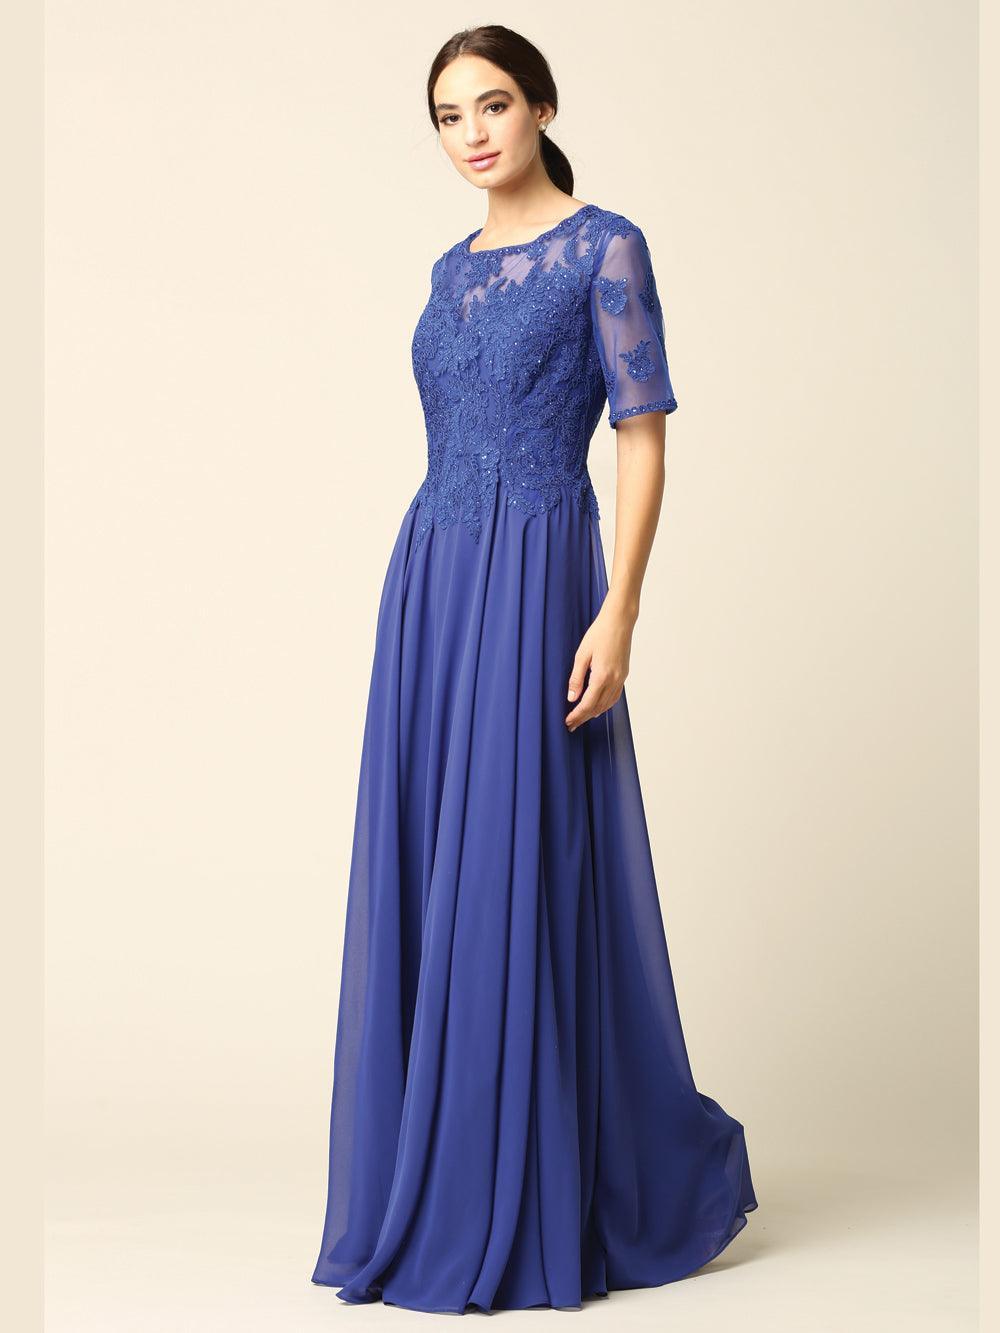 Formal Mother of the Bride Long Lace Chiffon Dress Sale - The Dress Outlet